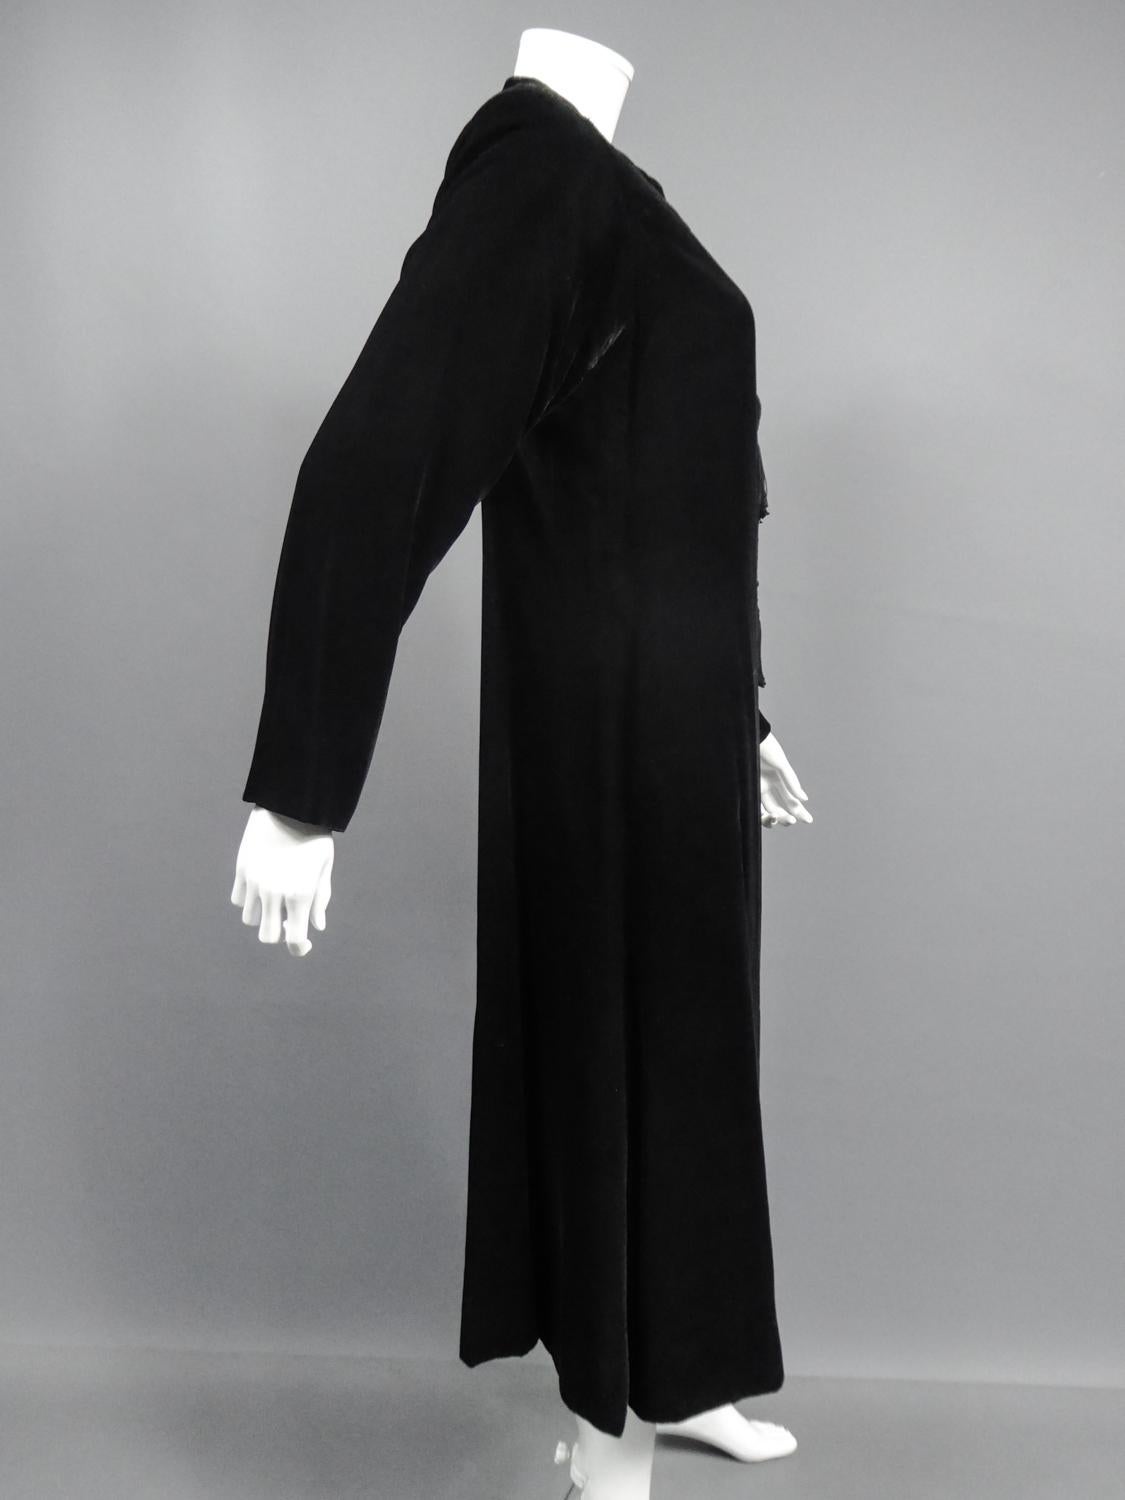 A french Couture Emanuel Ungaro Little Black Dress Number 4383-10-76 Circa 1976 For Sale 8